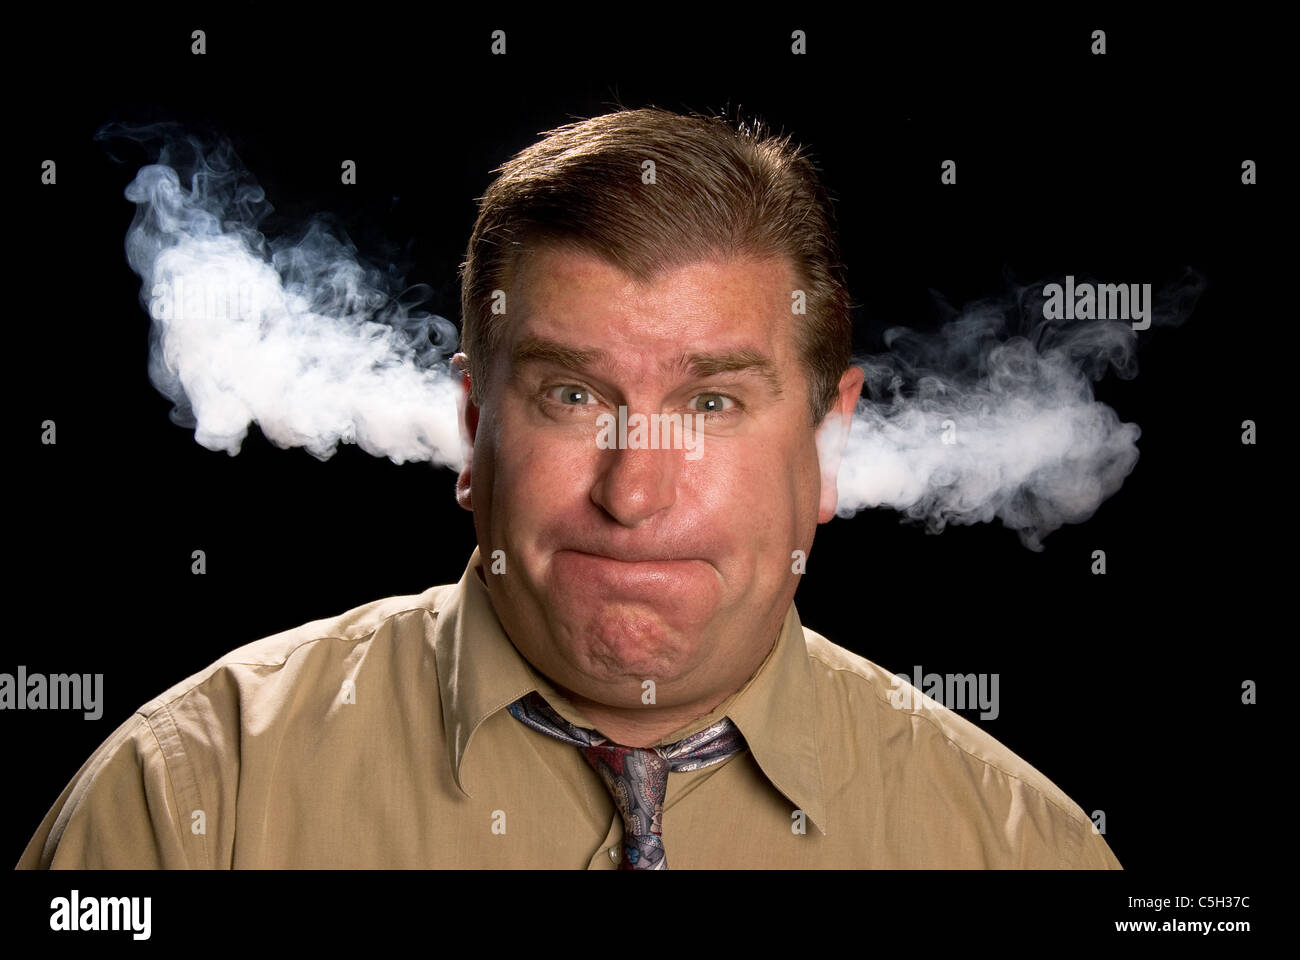 A man is angry and venting smoke from his ears in a classic expression shared in illustrations and cartoons. Stock Photo